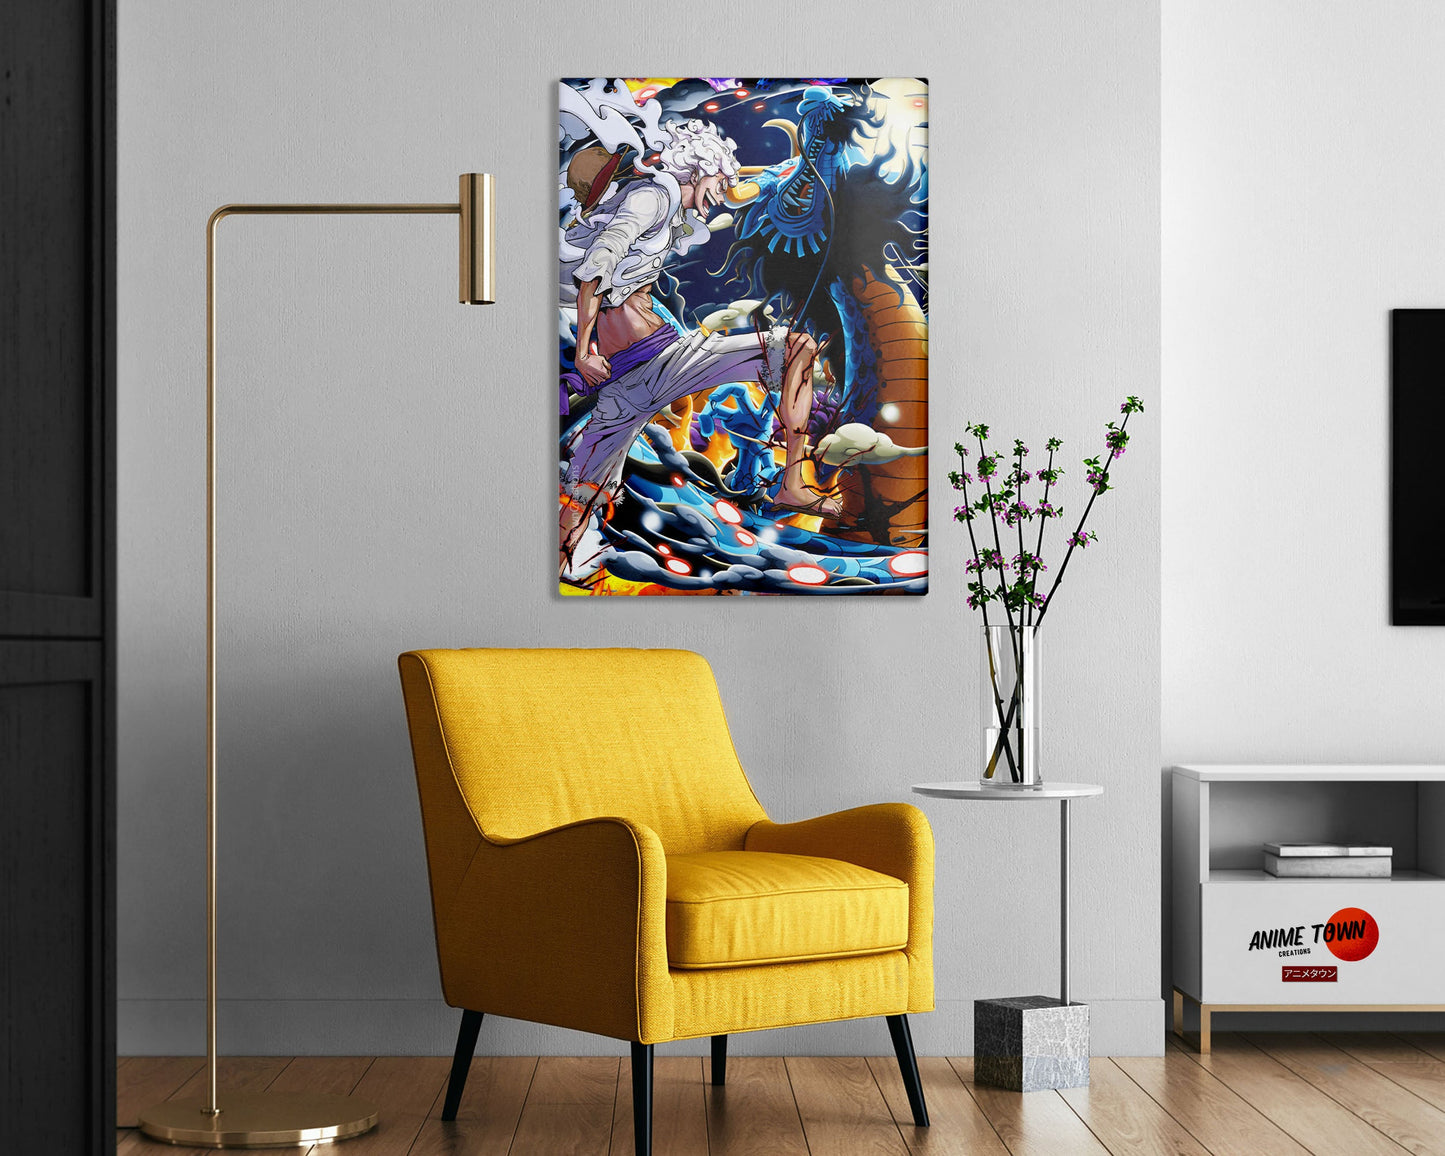 Anime Town Creations Metal Poster One Piece Luffy Gear 5 vs Kaido 24" x 36" Home Goods - Anime One Piece Metal Poster